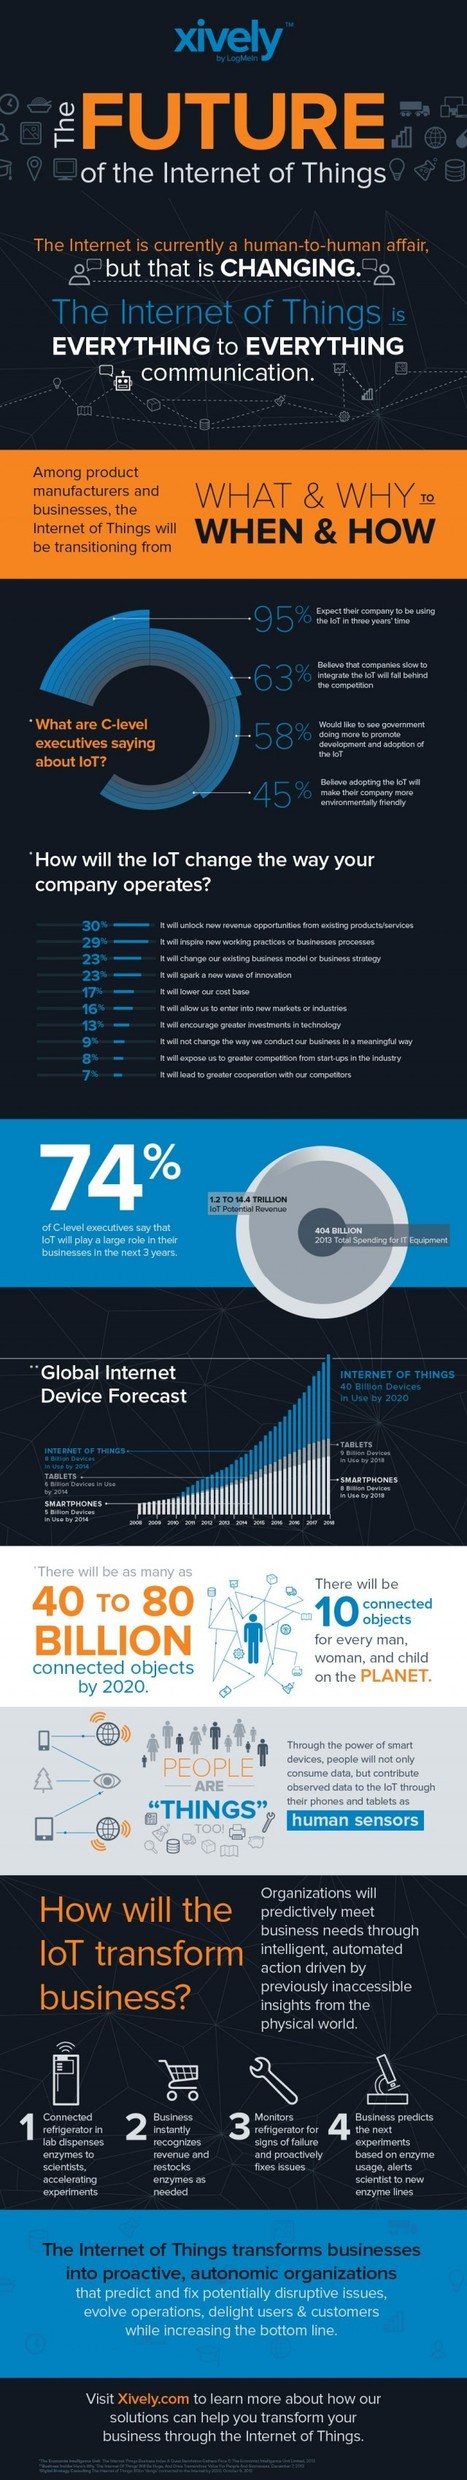 The Future of the Internet of Things [infographic] | 21st Century Learning and Teaching | Scoop.it